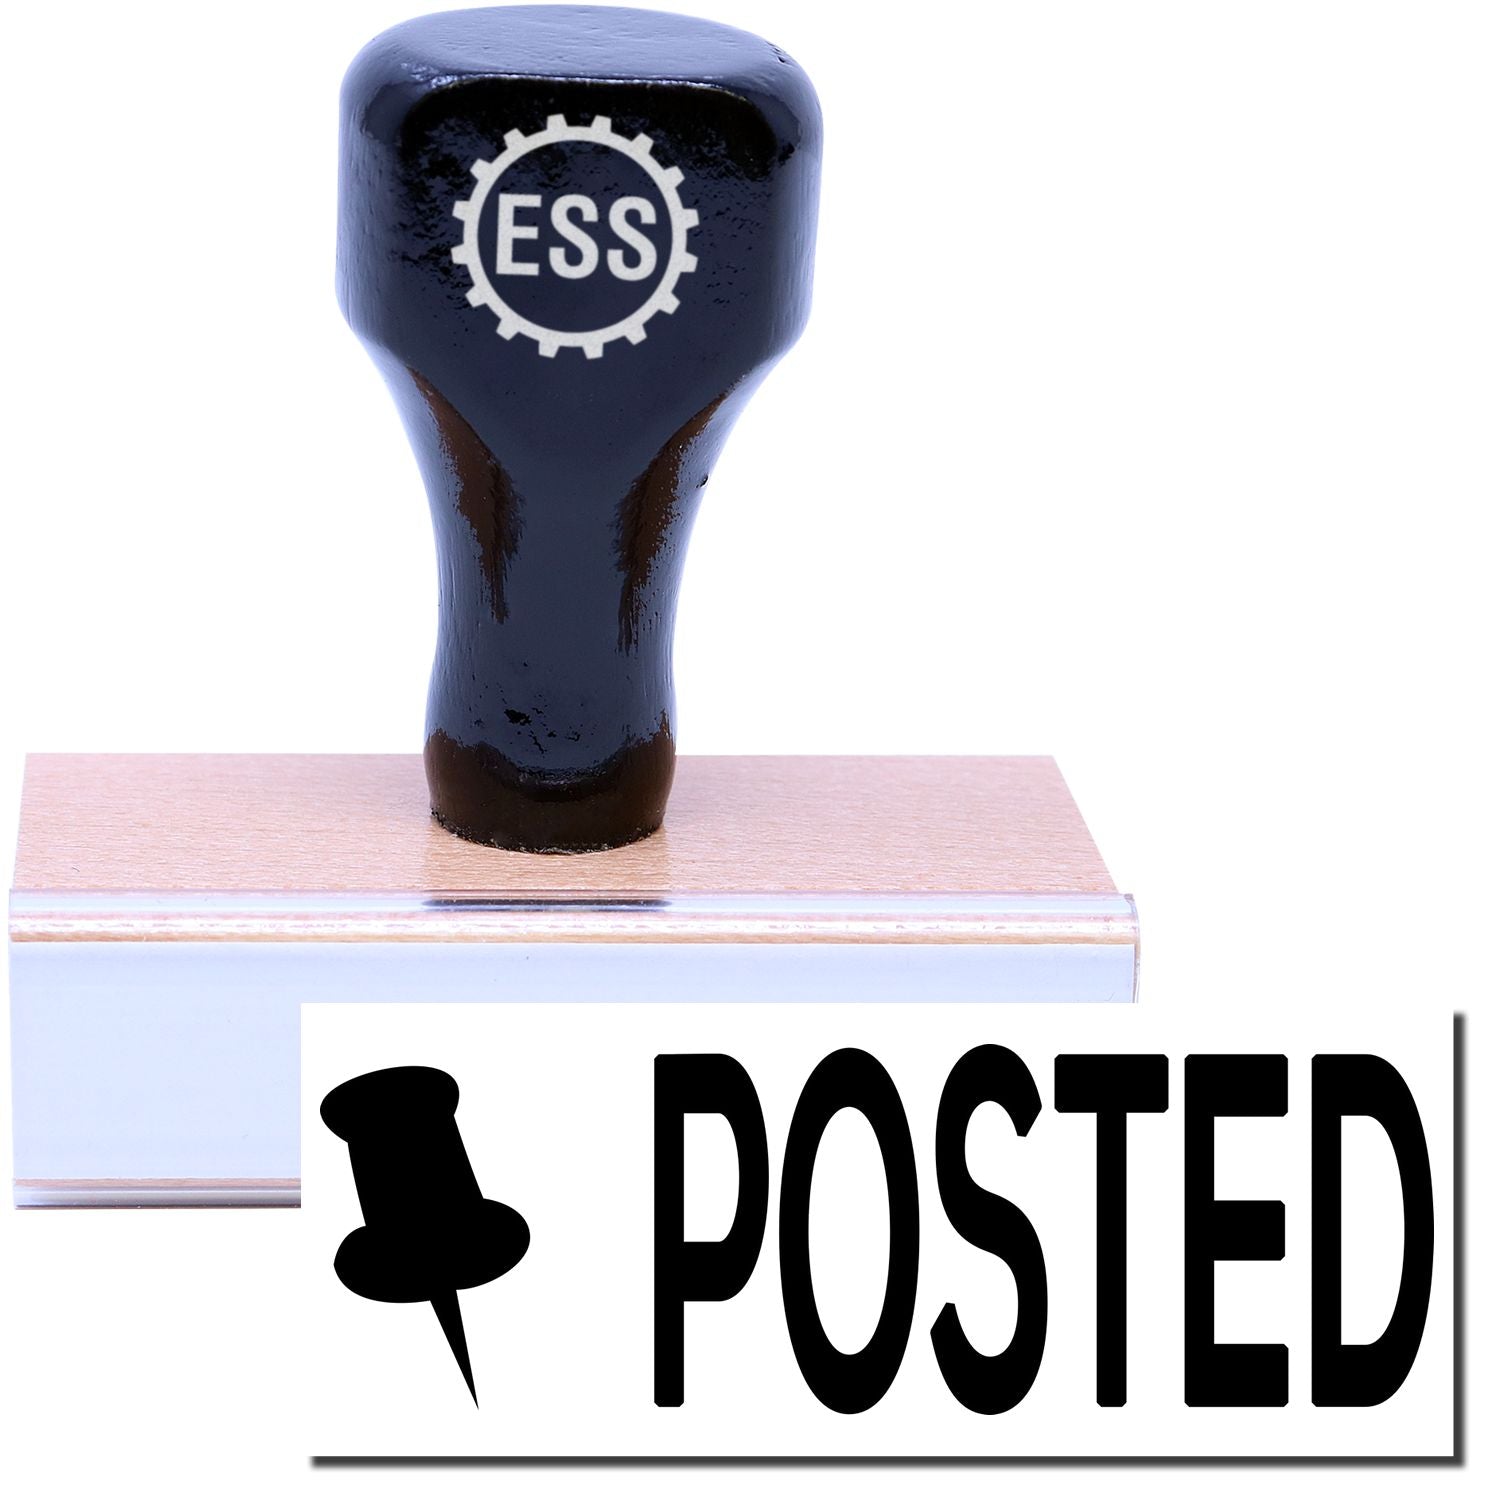 A stock office rubber stamp with a stamped image showing how the text "POSTED" in bold font with a thumbtack image on the left side is displayed after stamping.